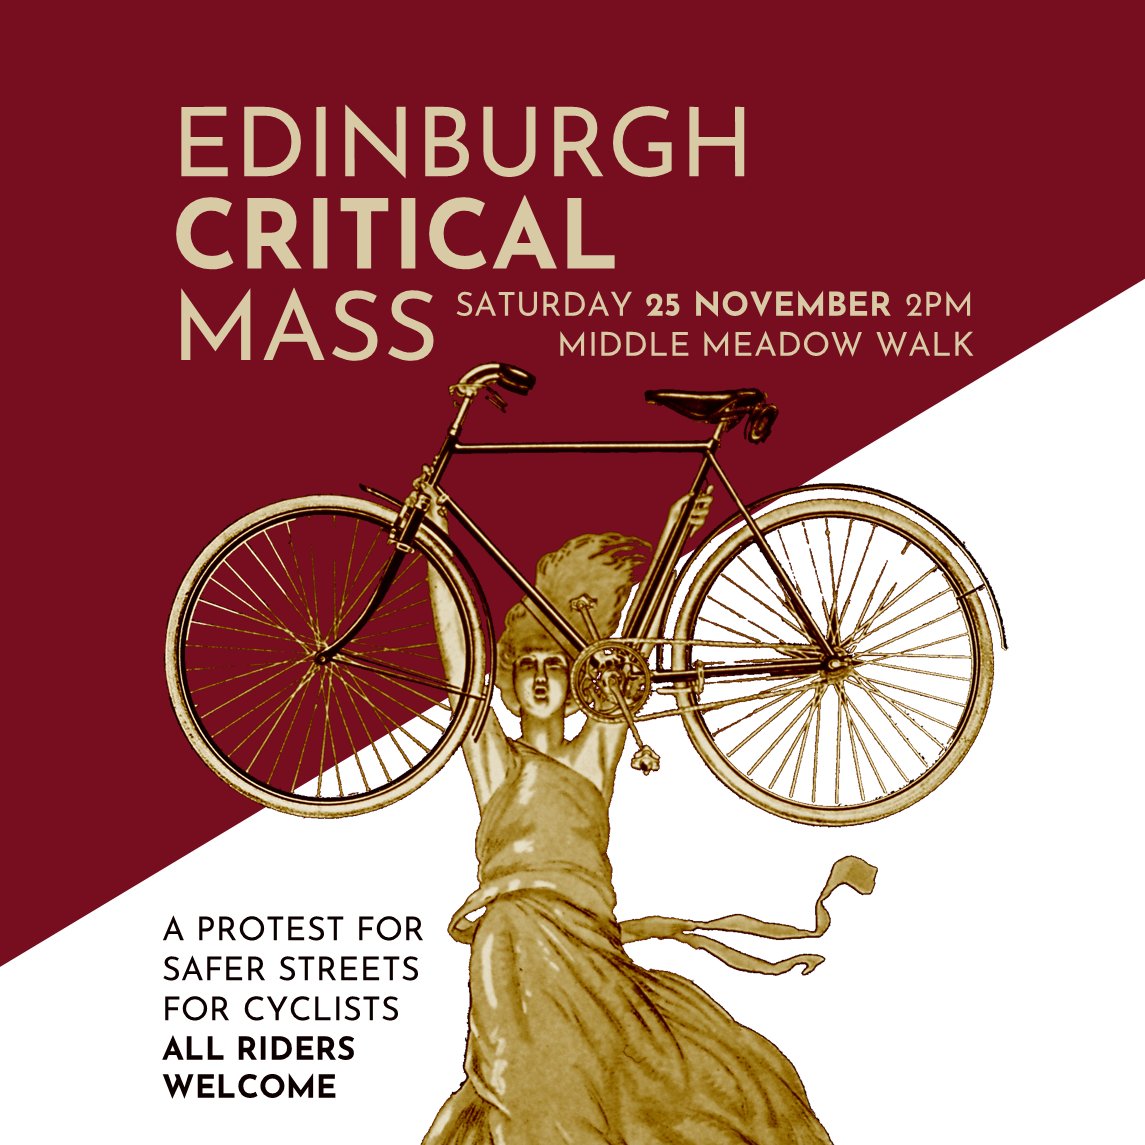 Join us next Saturday 25th November for our final #CriticalMass ride of the year, starting at 2PM, Middle Meadow Walk Each month, we take to the streets to highlight our right to occupy the road, campaign for better routes for cyclists and enjoy some music and company Join us!